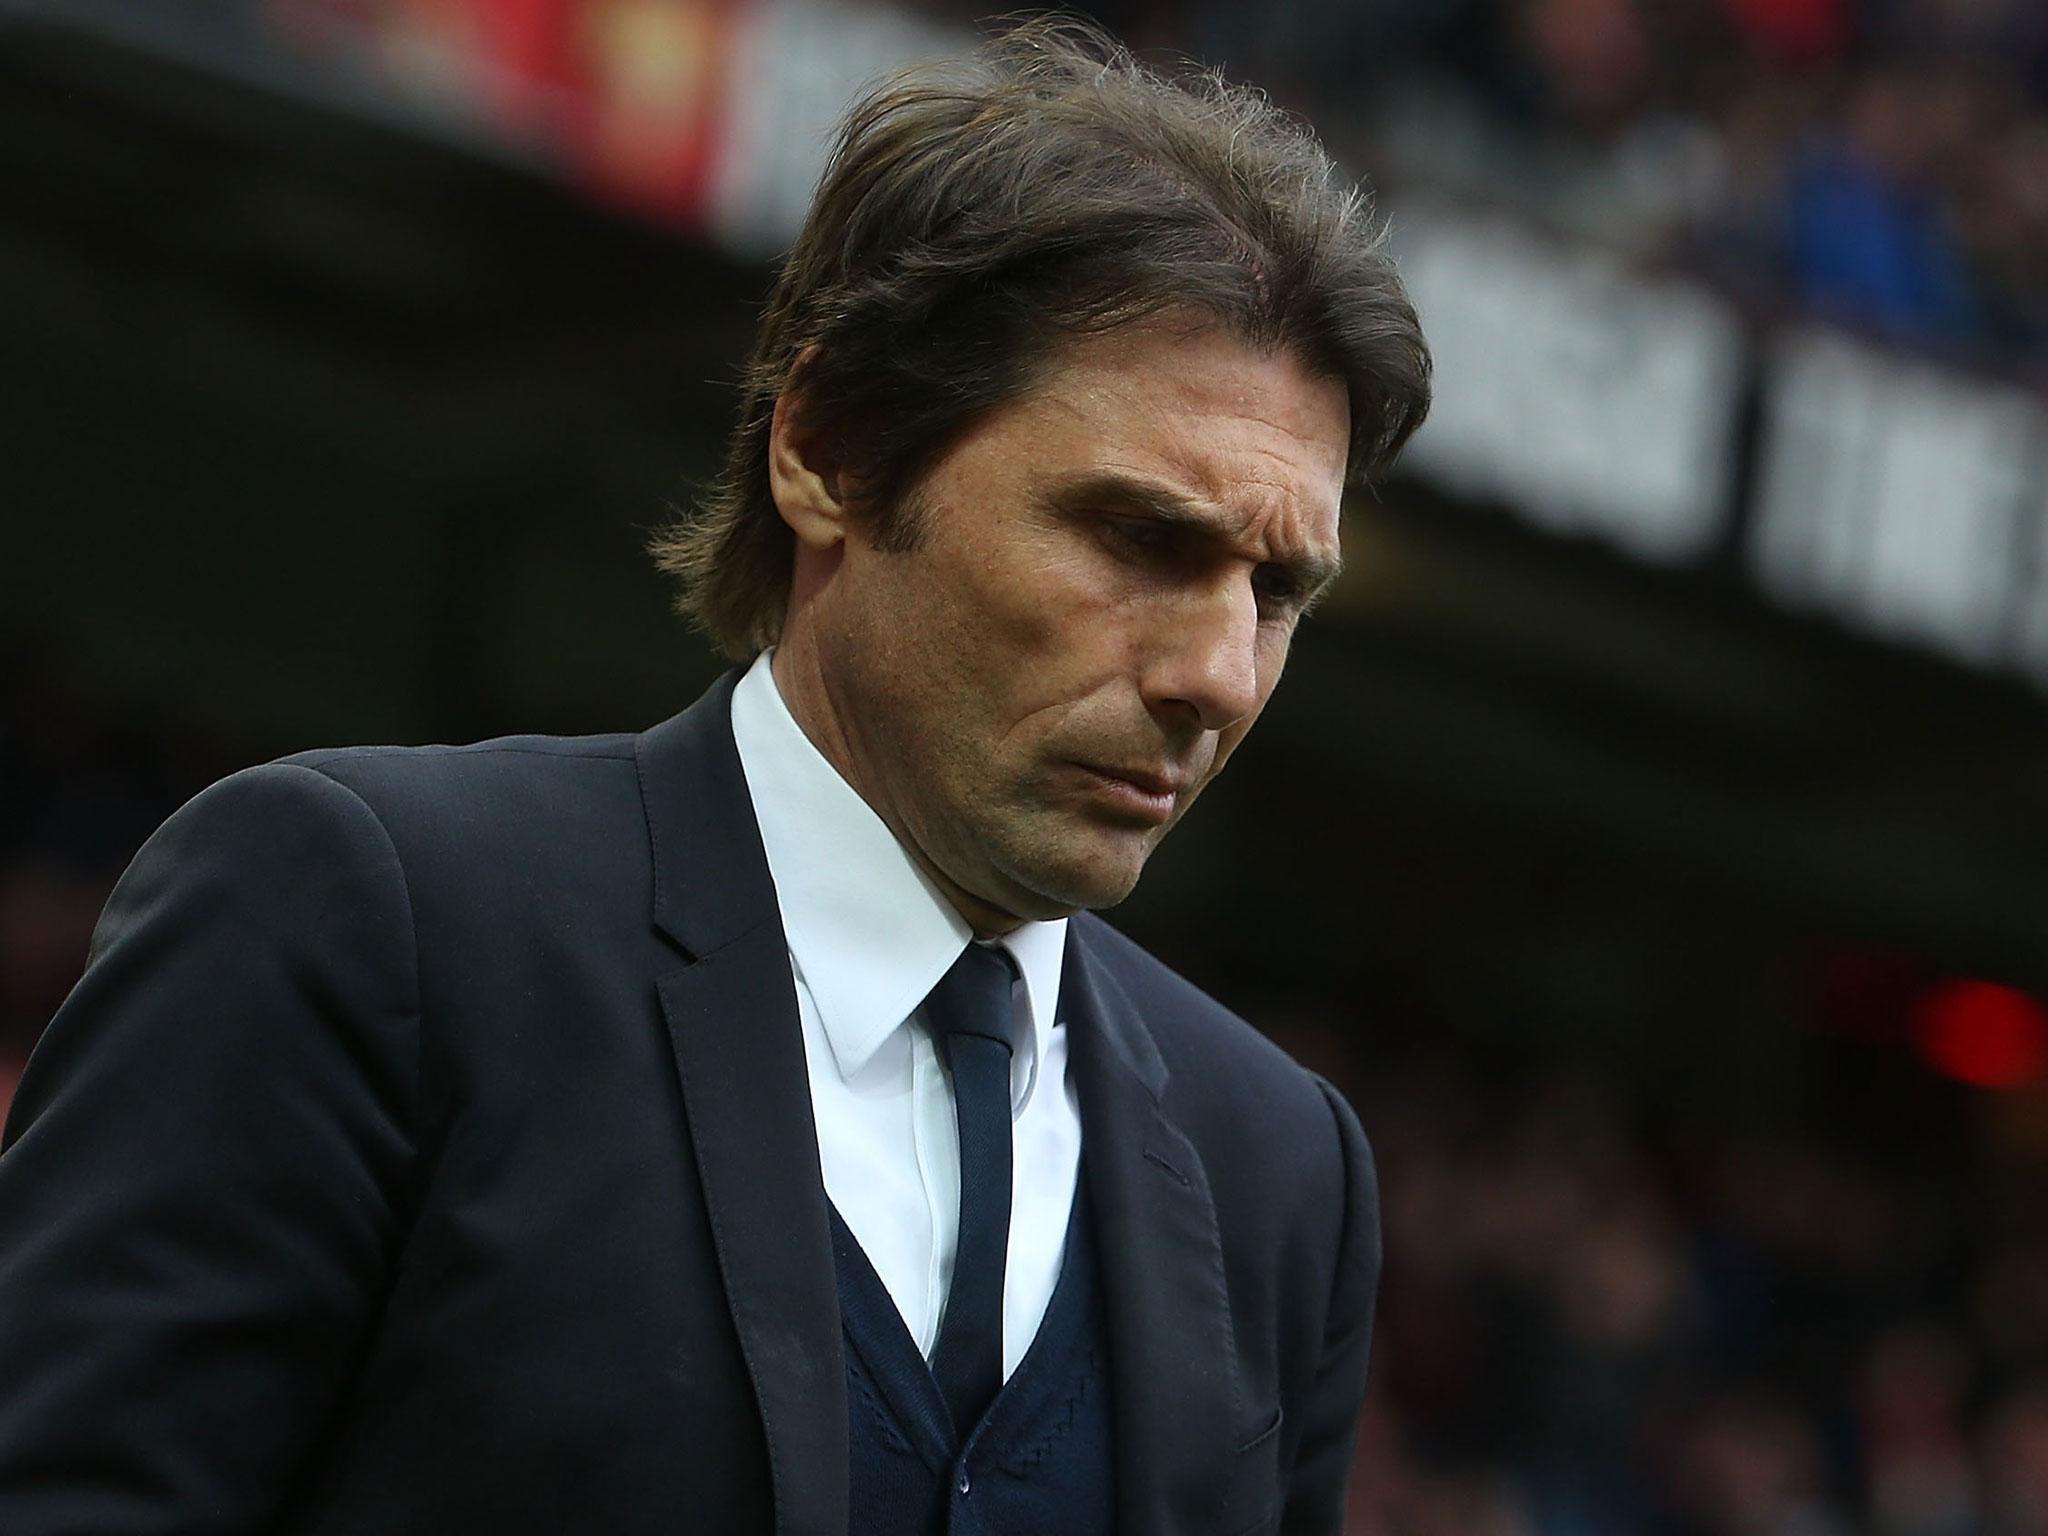 Antonio Conte has a peculiarly poor record in cup competitions